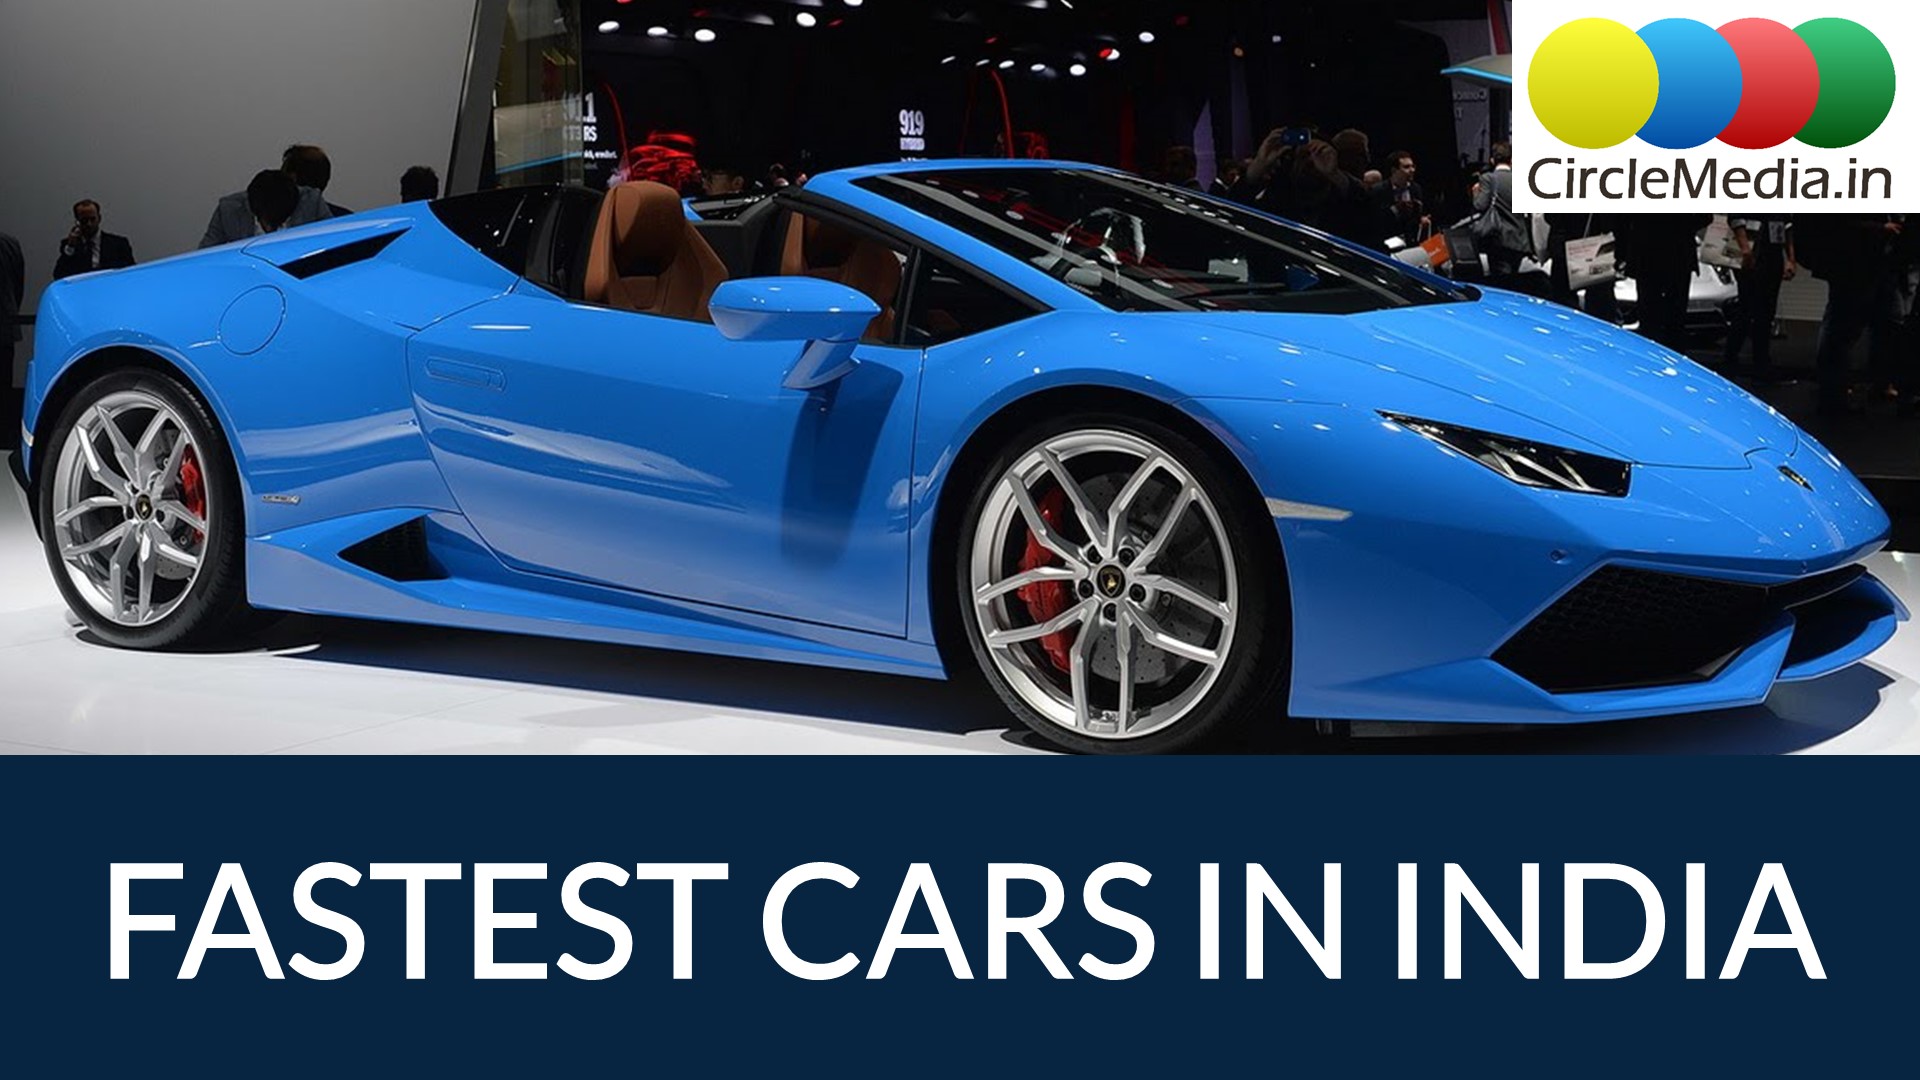 Top 10 Fastest Cars in India | List of sports cars and their top speeds | CircleMedia.in